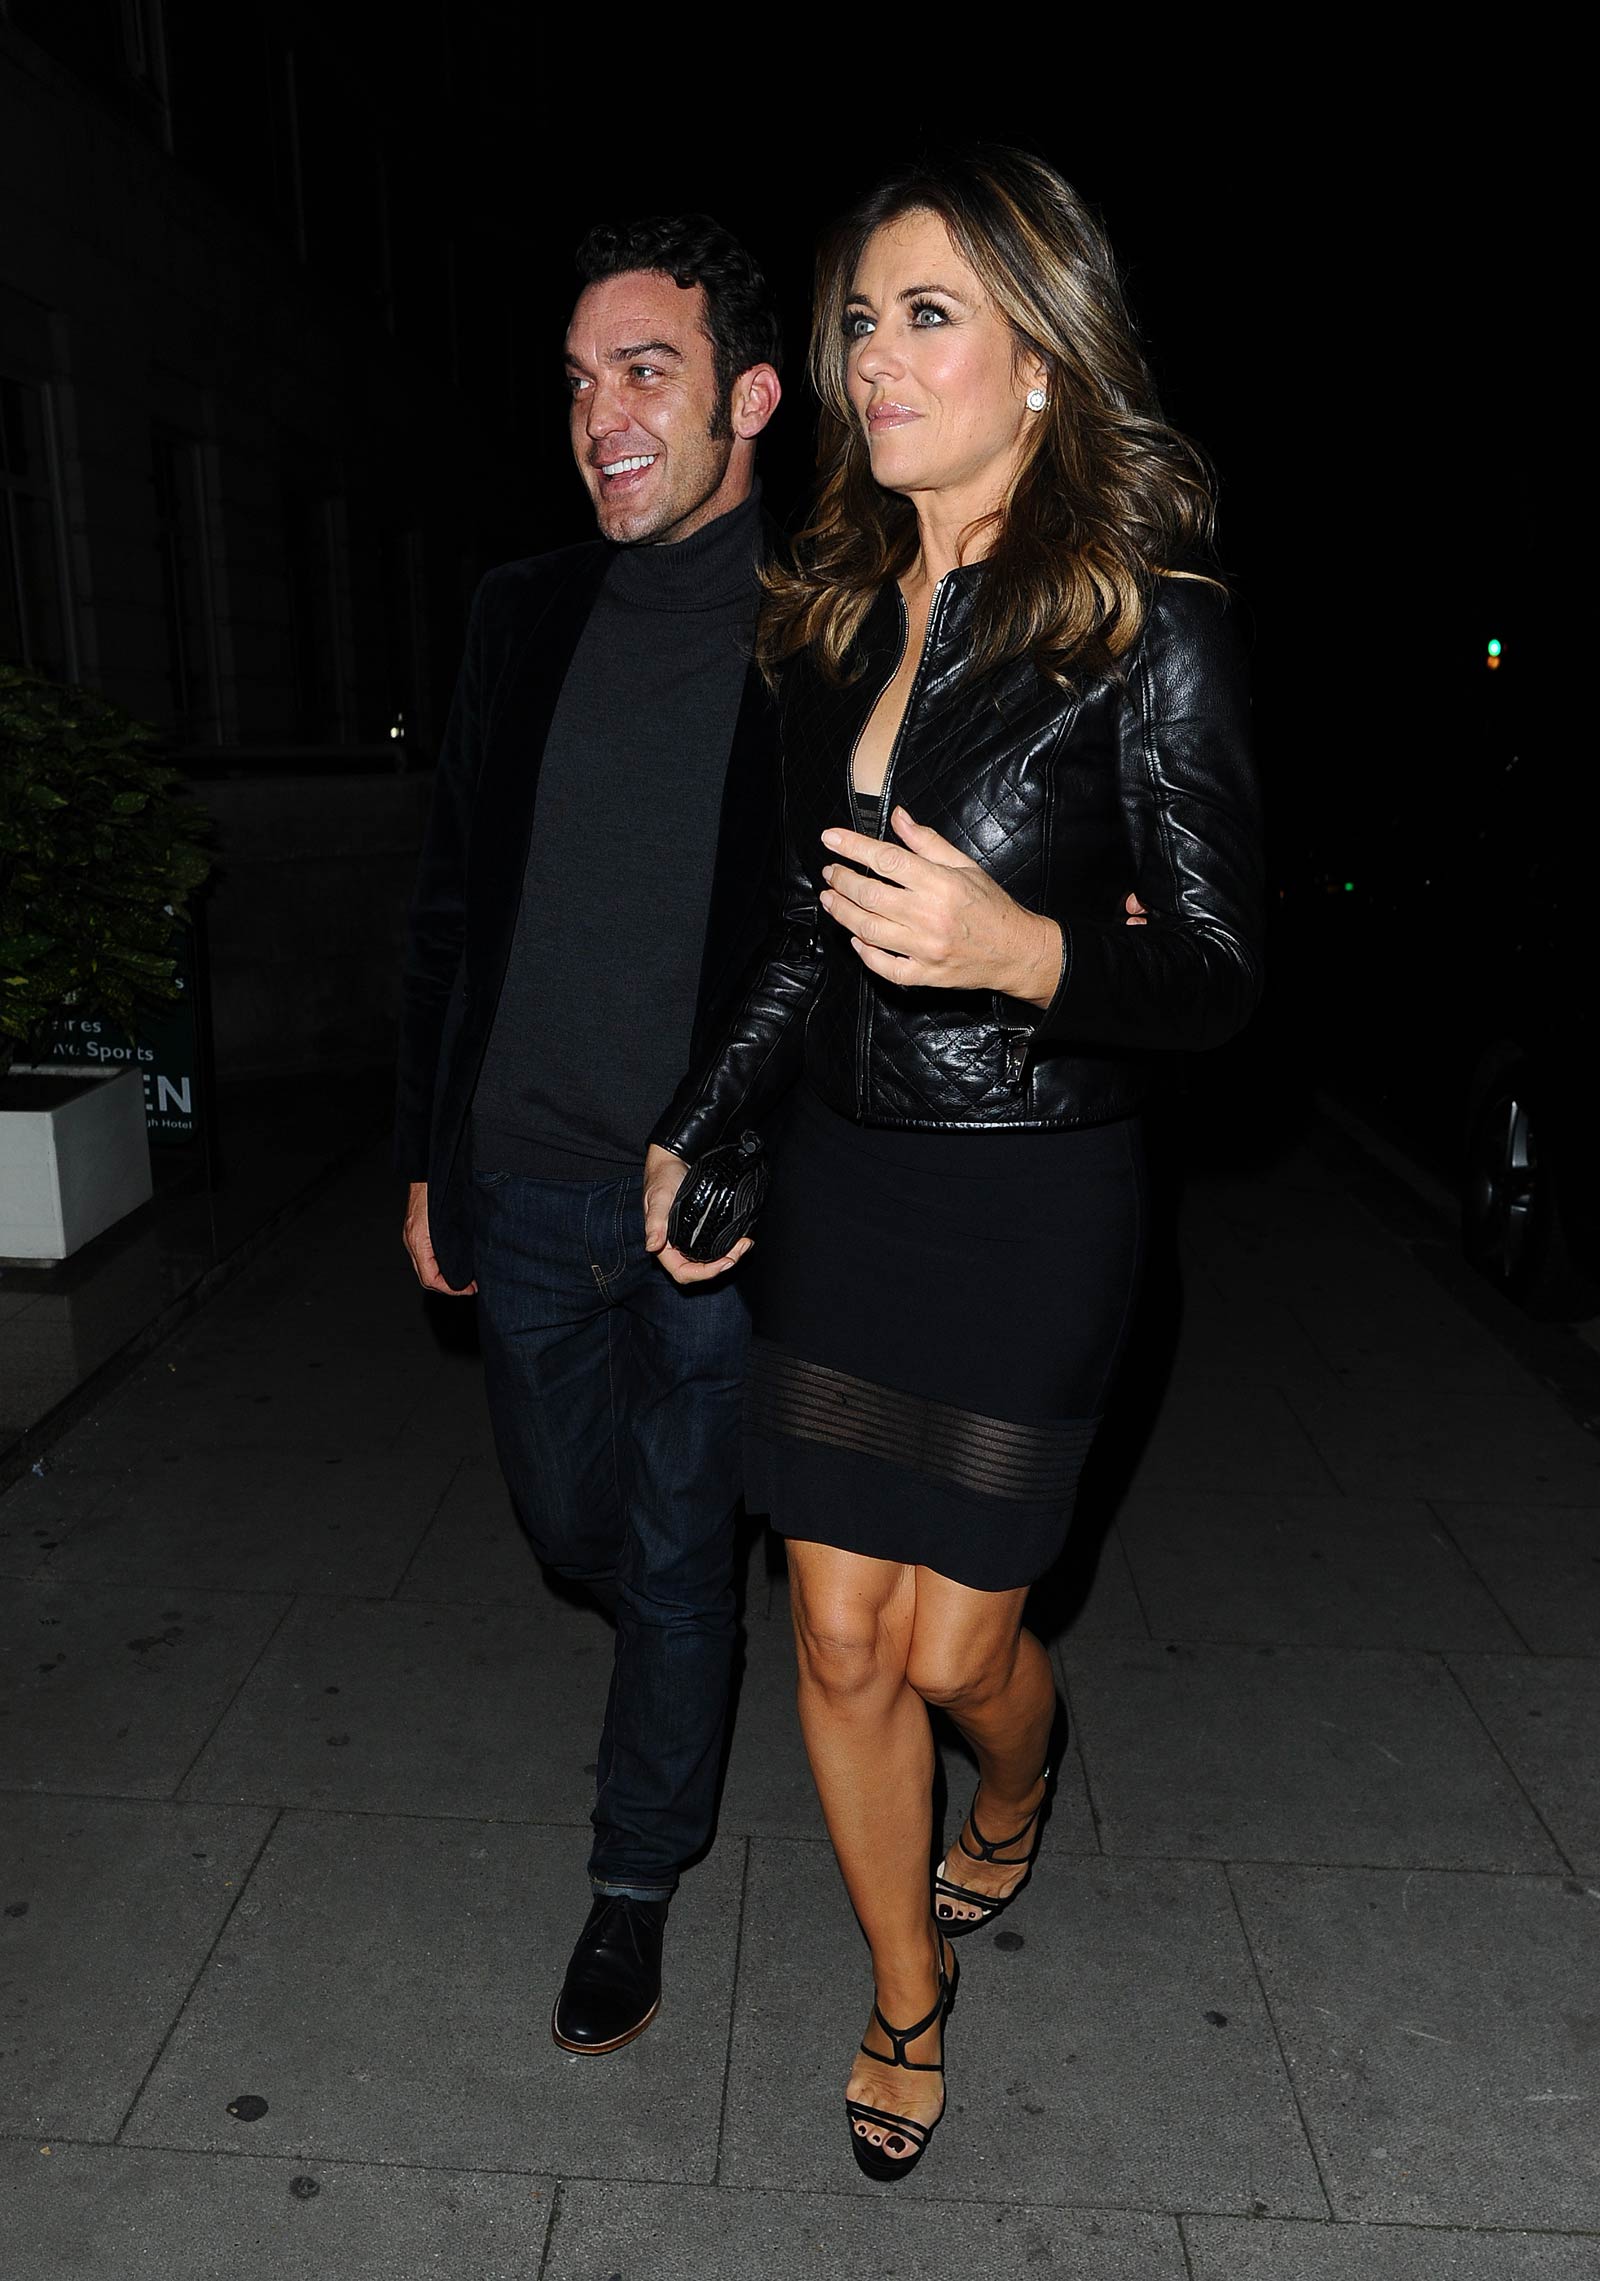 Liz Hurley spotted Night Out at Scott’s Restaurant